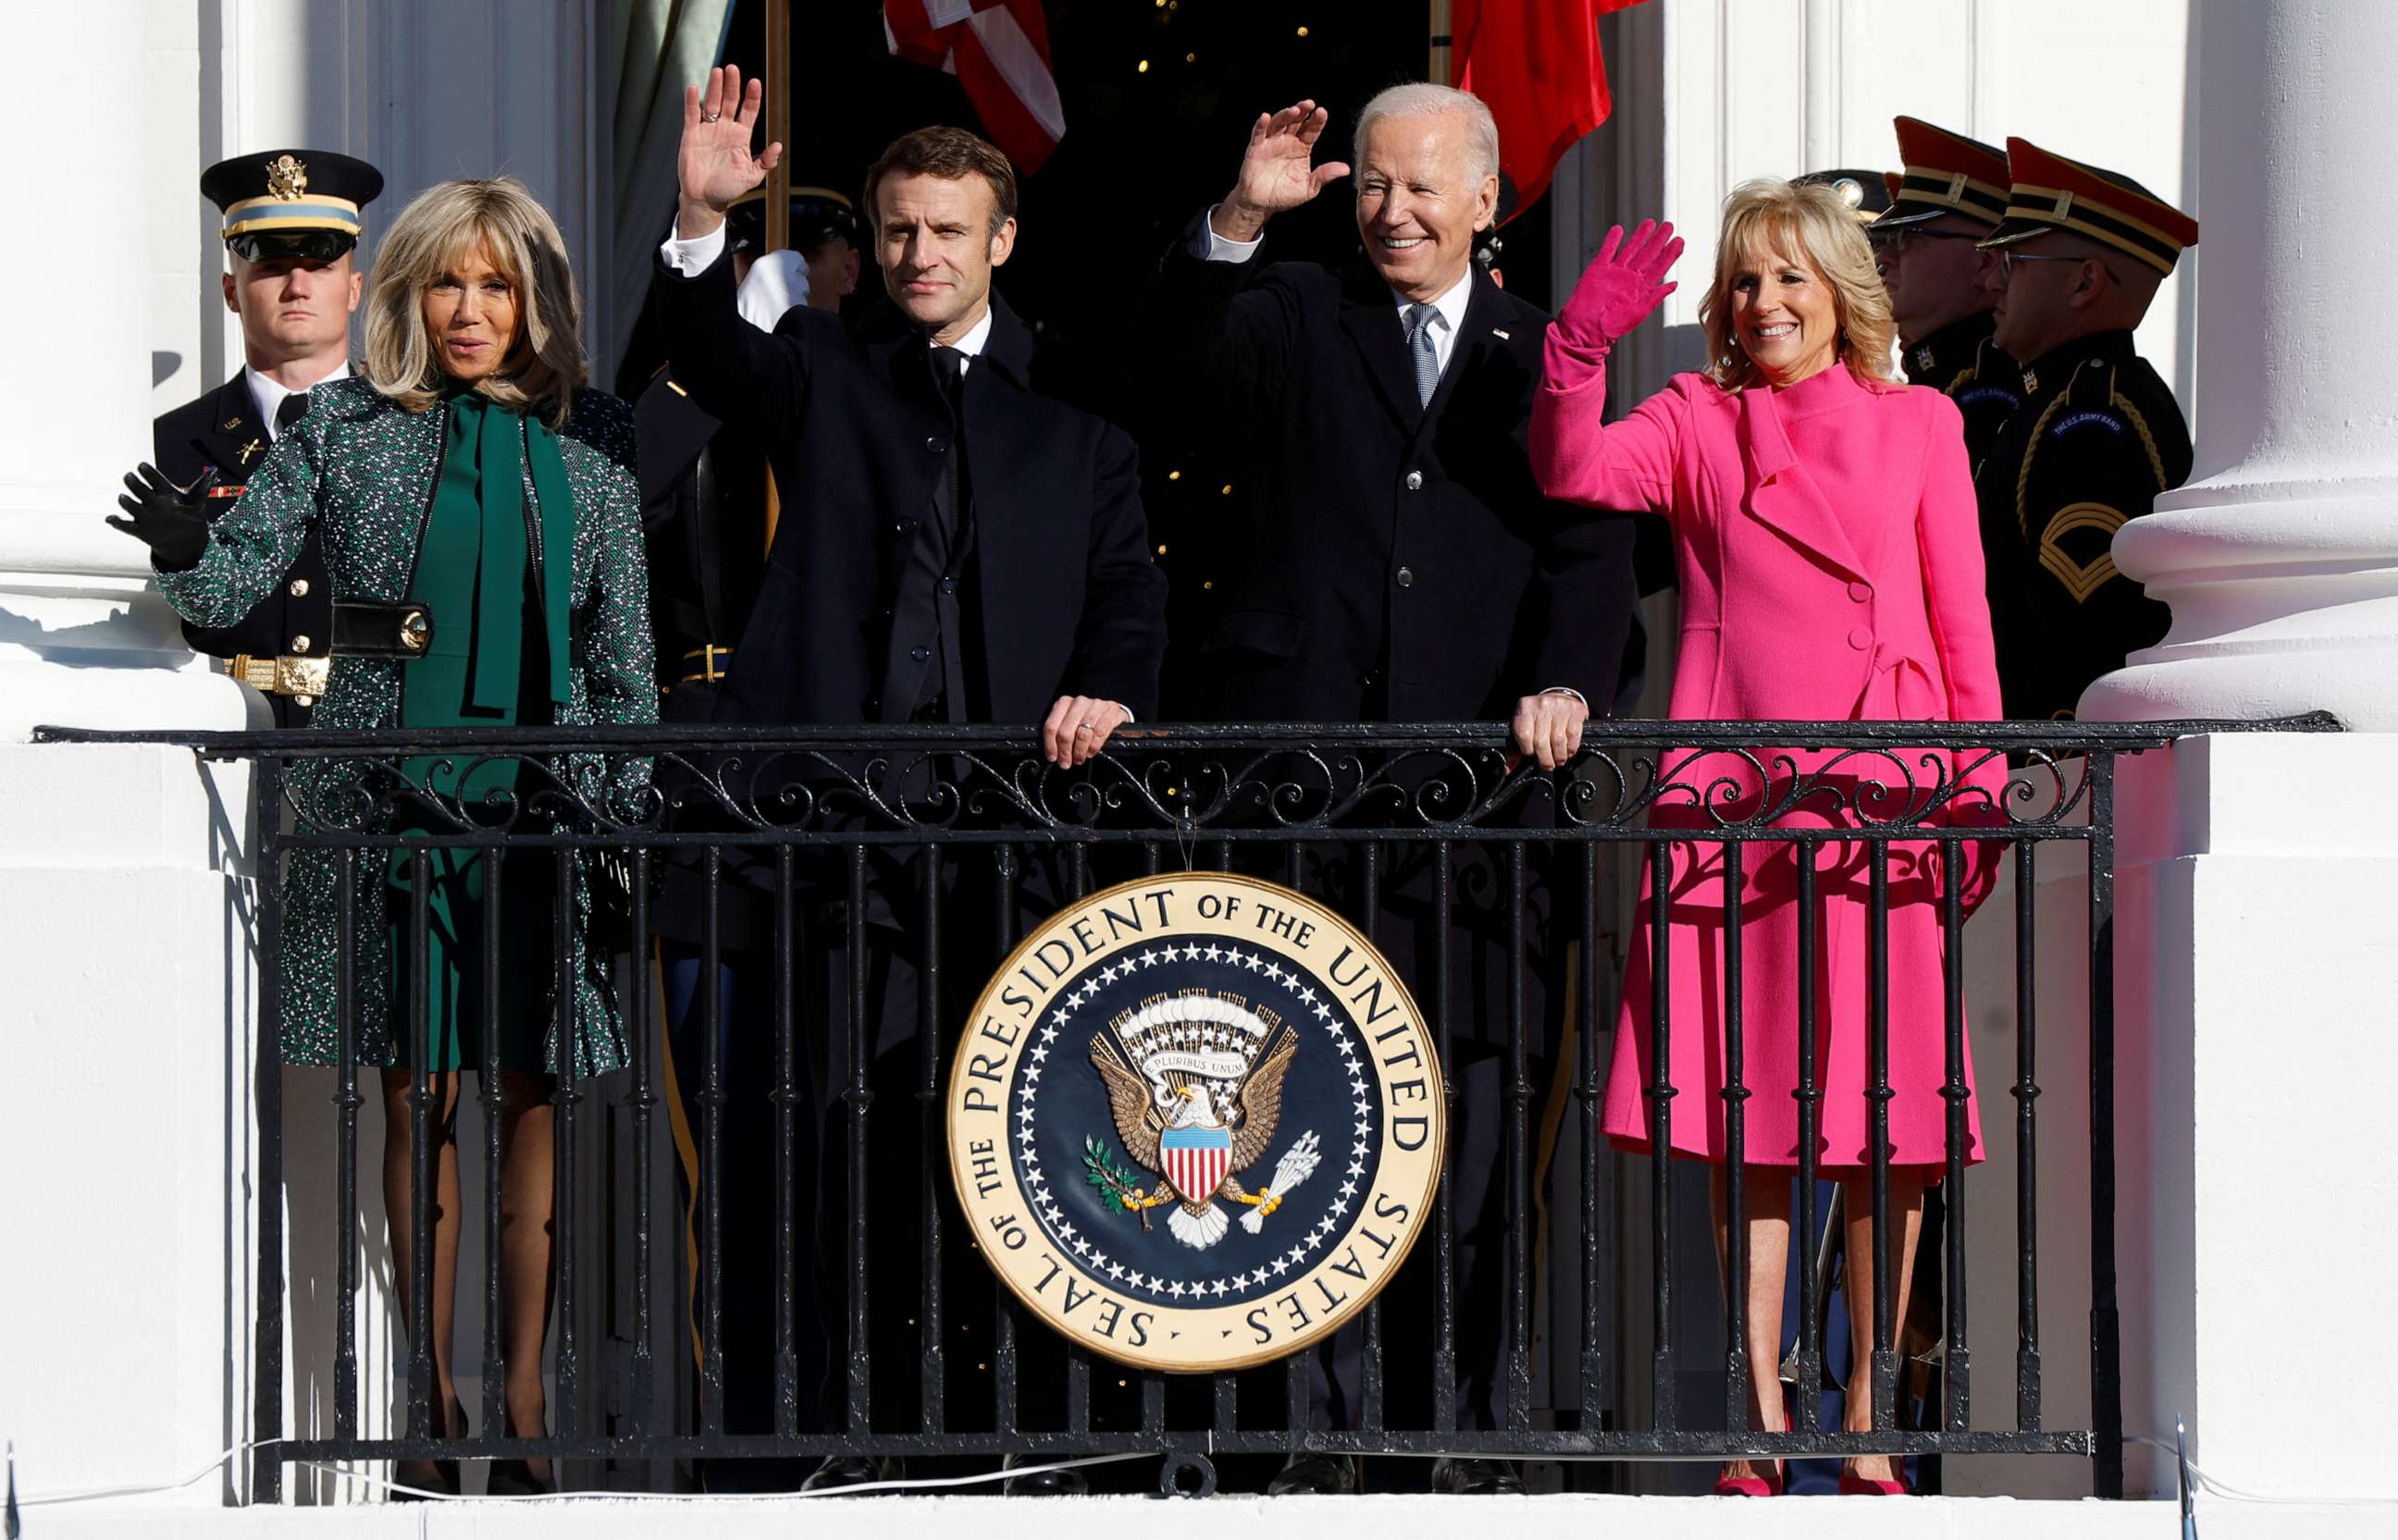 PHOTO: French President Emmanuel Macron and U.S. President Joe Biden with their wives Brigitte Macron and U.S. first lady Jill Biden on the Truman Balcony after an official State Arrival Ceremony for Macron at the White House in Washington, Dec. 1, 2022.